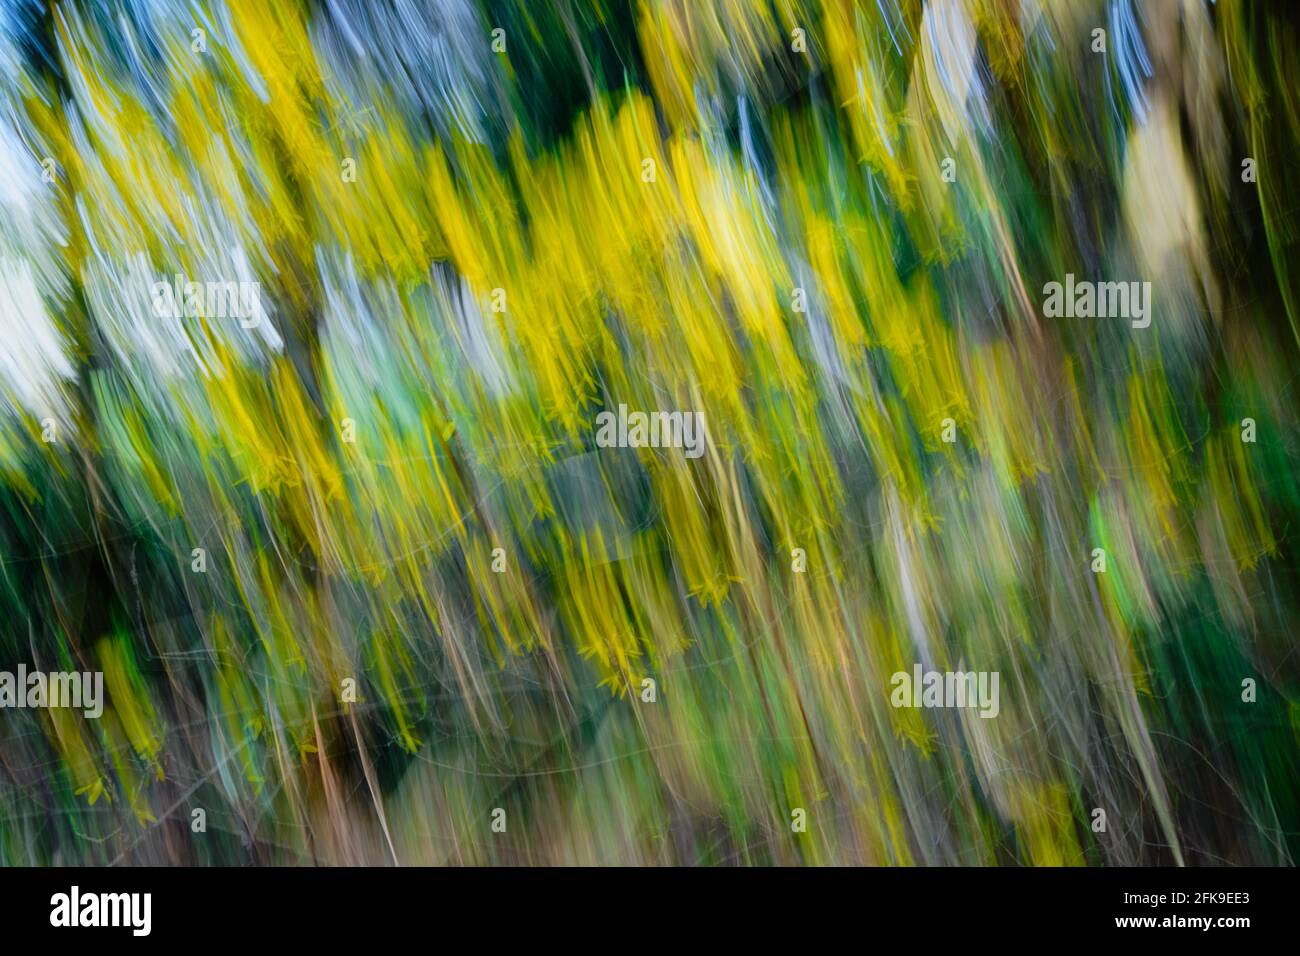 Yellow star trails slicing diagonally across the image are created with ICM (Intentional Camera Movement) from forsythia flowers in a forested area Stock Photo